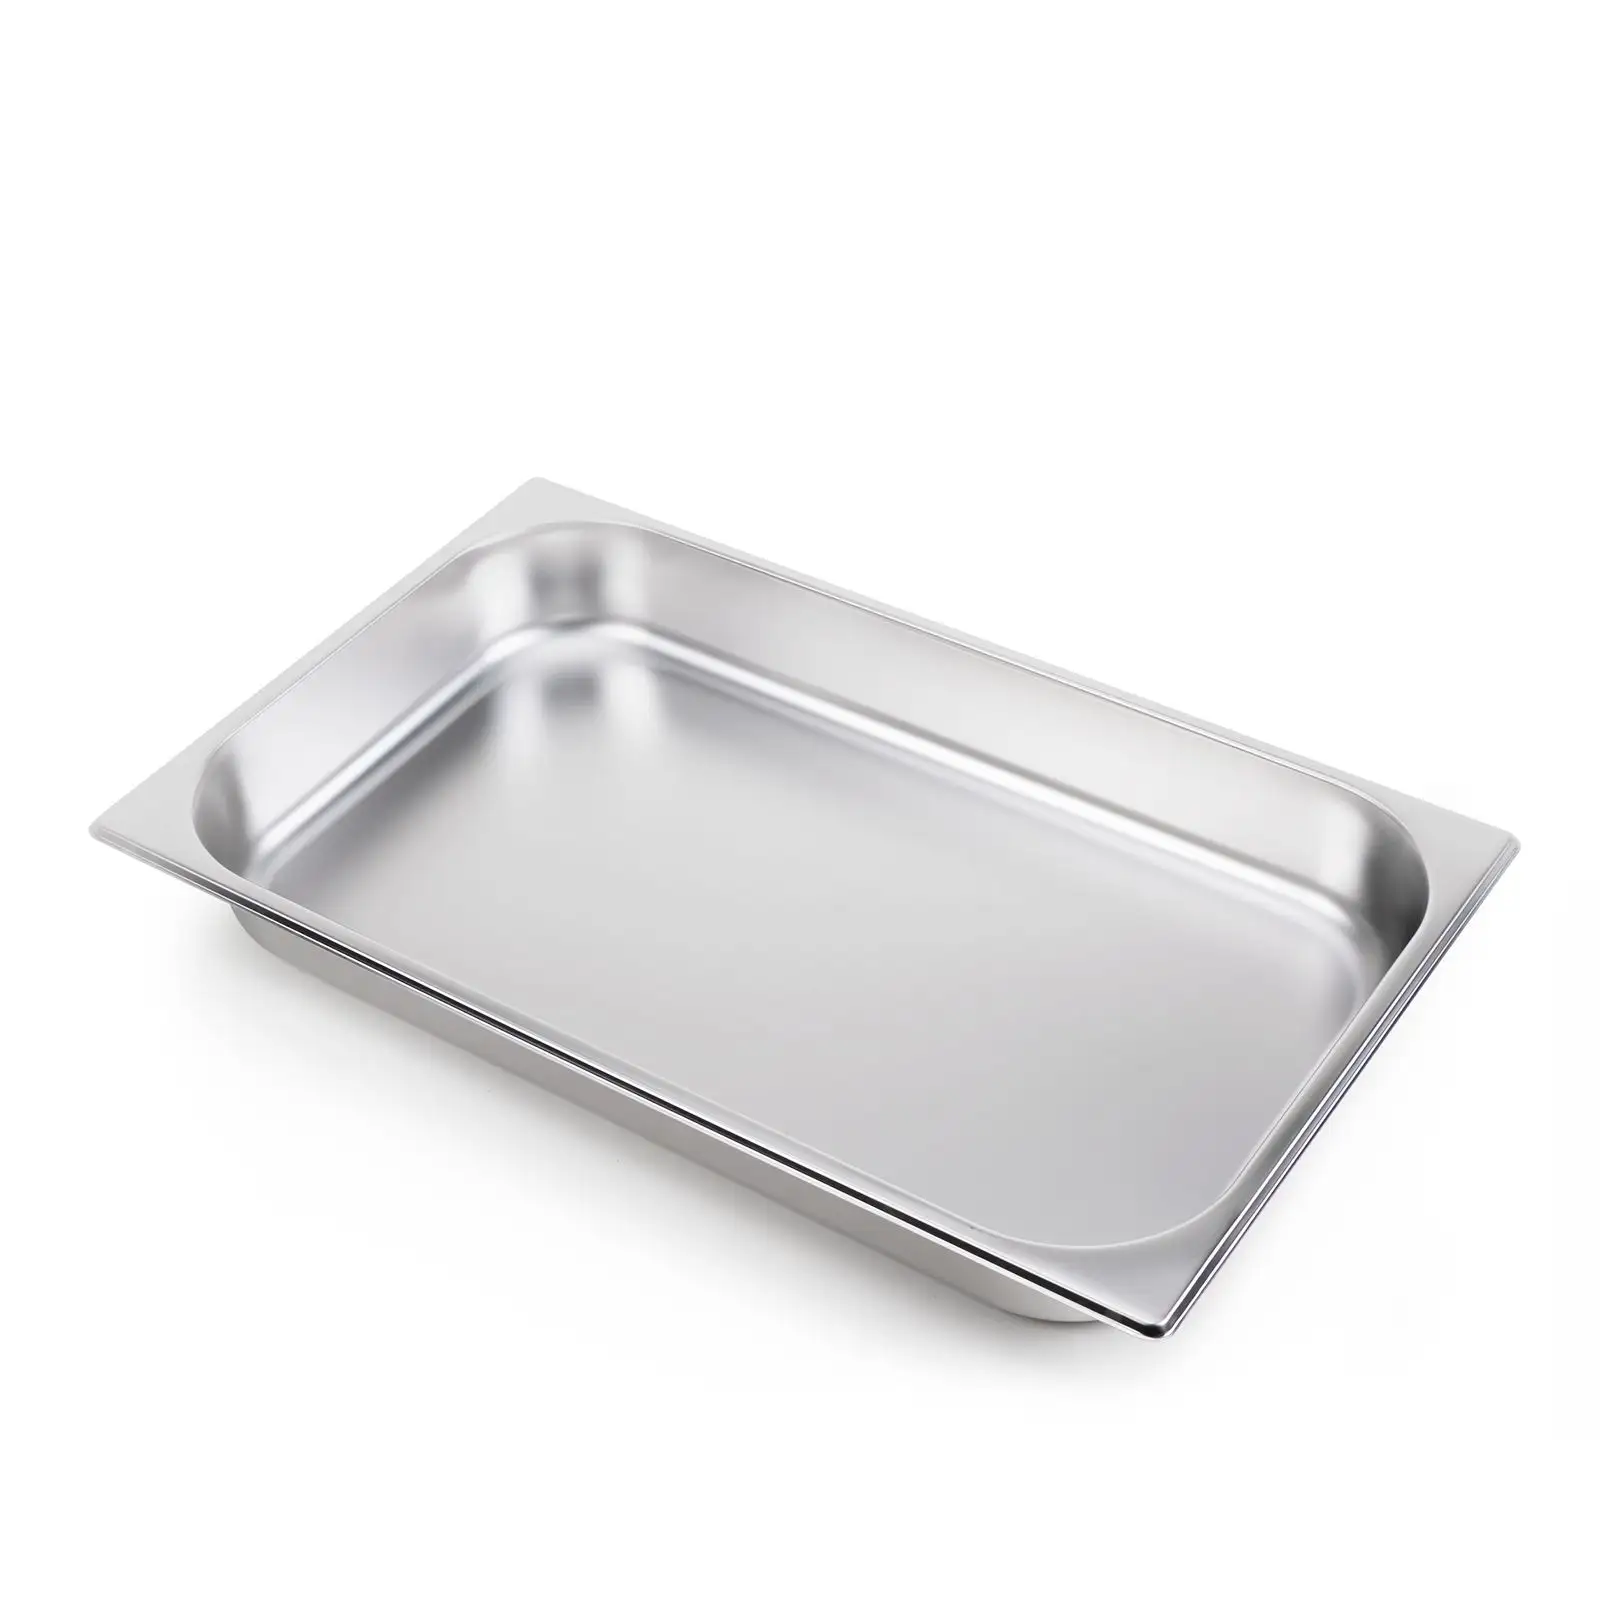 Gastronorm Pan Commercial Restaurant Rectangular American Style Food Storage Kitchen Equipment Stainless Steel 1/1 GN Pan